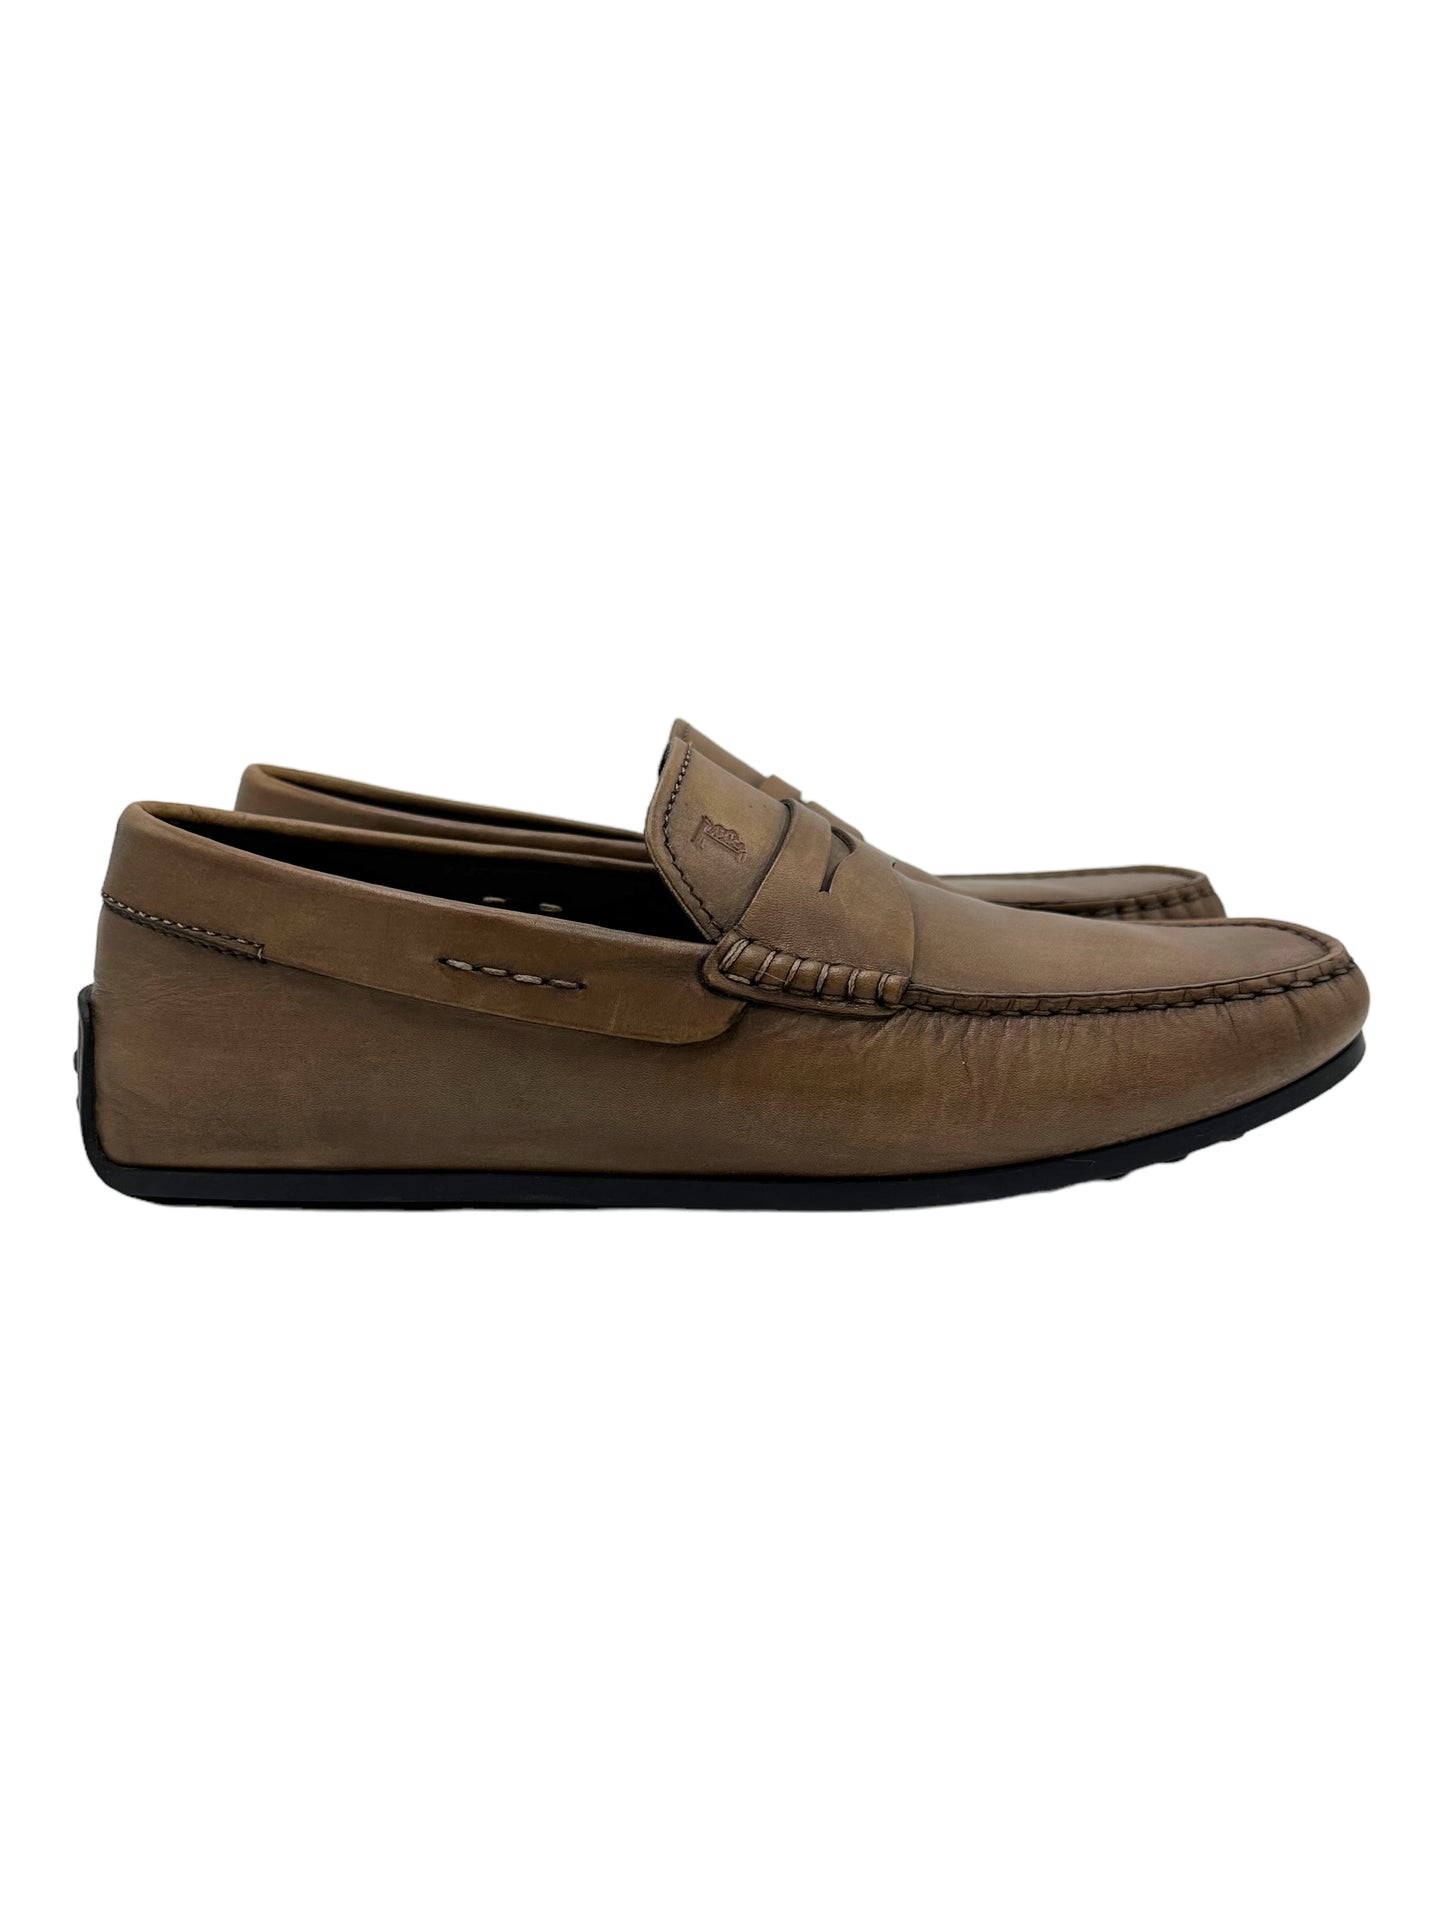 Tods Caramel Brown Leather City Driving Loafers - Genuine Design Luxury Consignment Calgary, Alberta, Canada New and Pre-Owned Clothing, Shoes, Accessories.